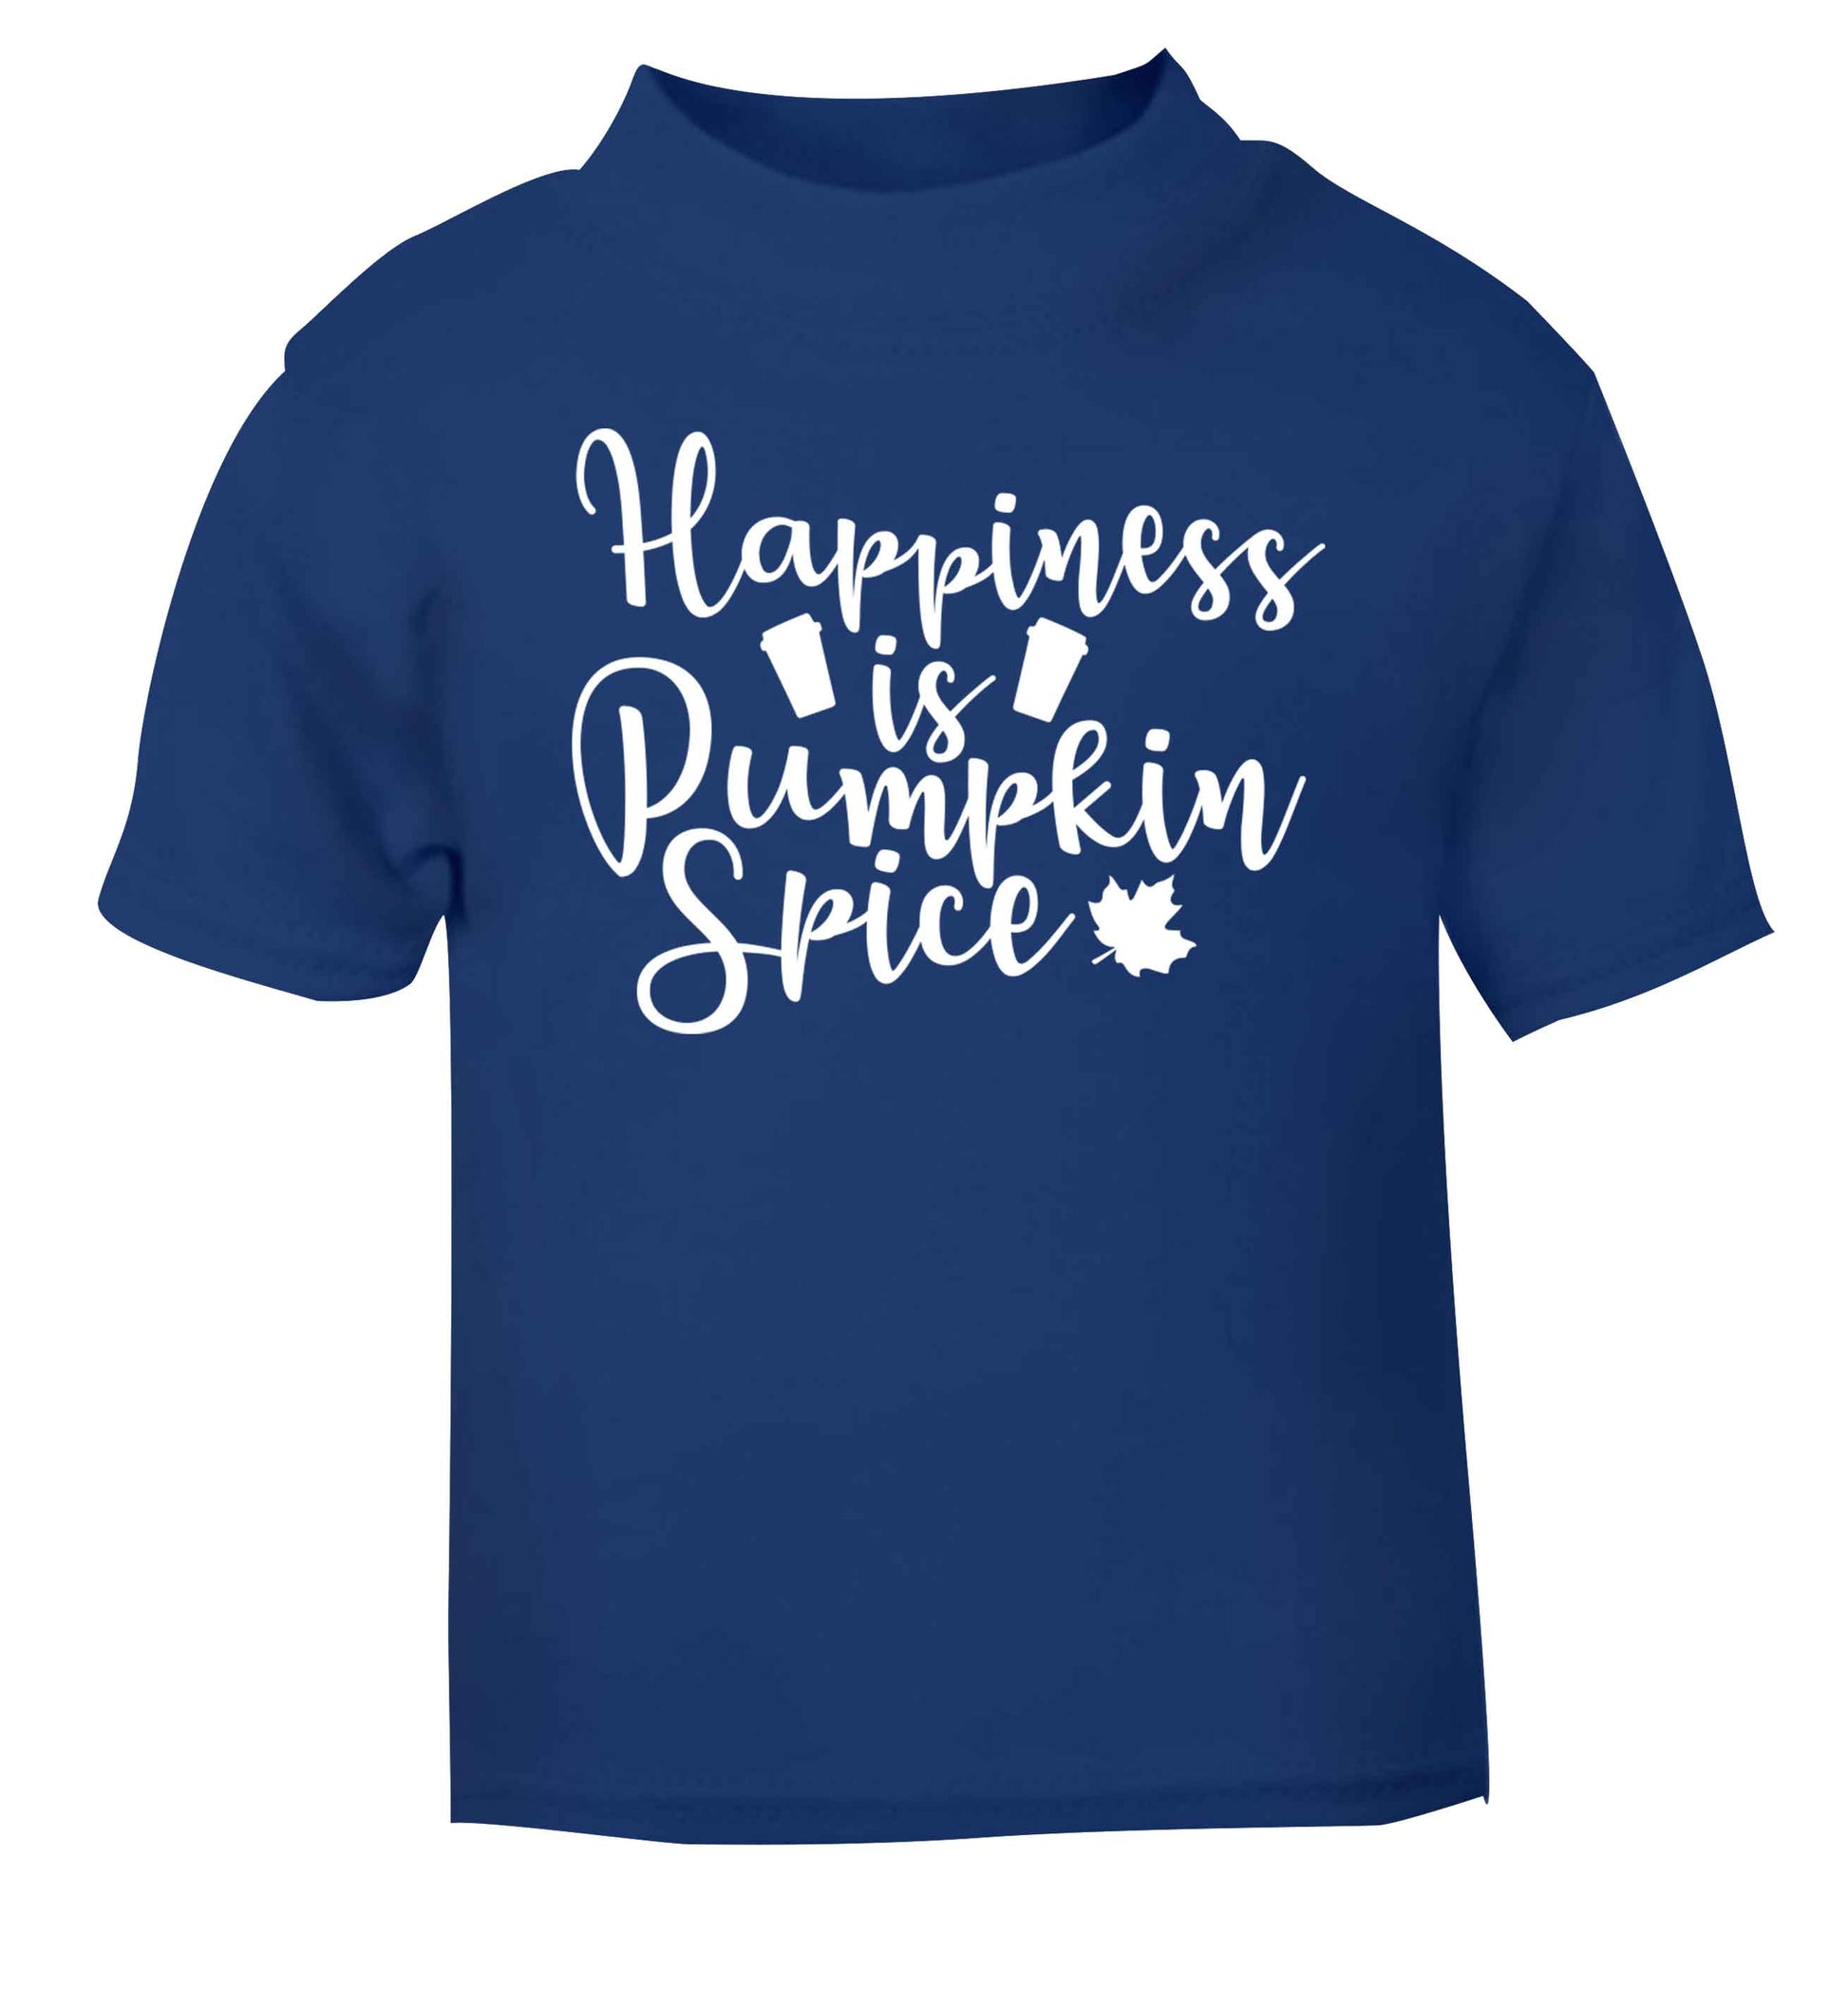 Happiness Pumpkin Spice blue baby toddler Tshirt 2 Years